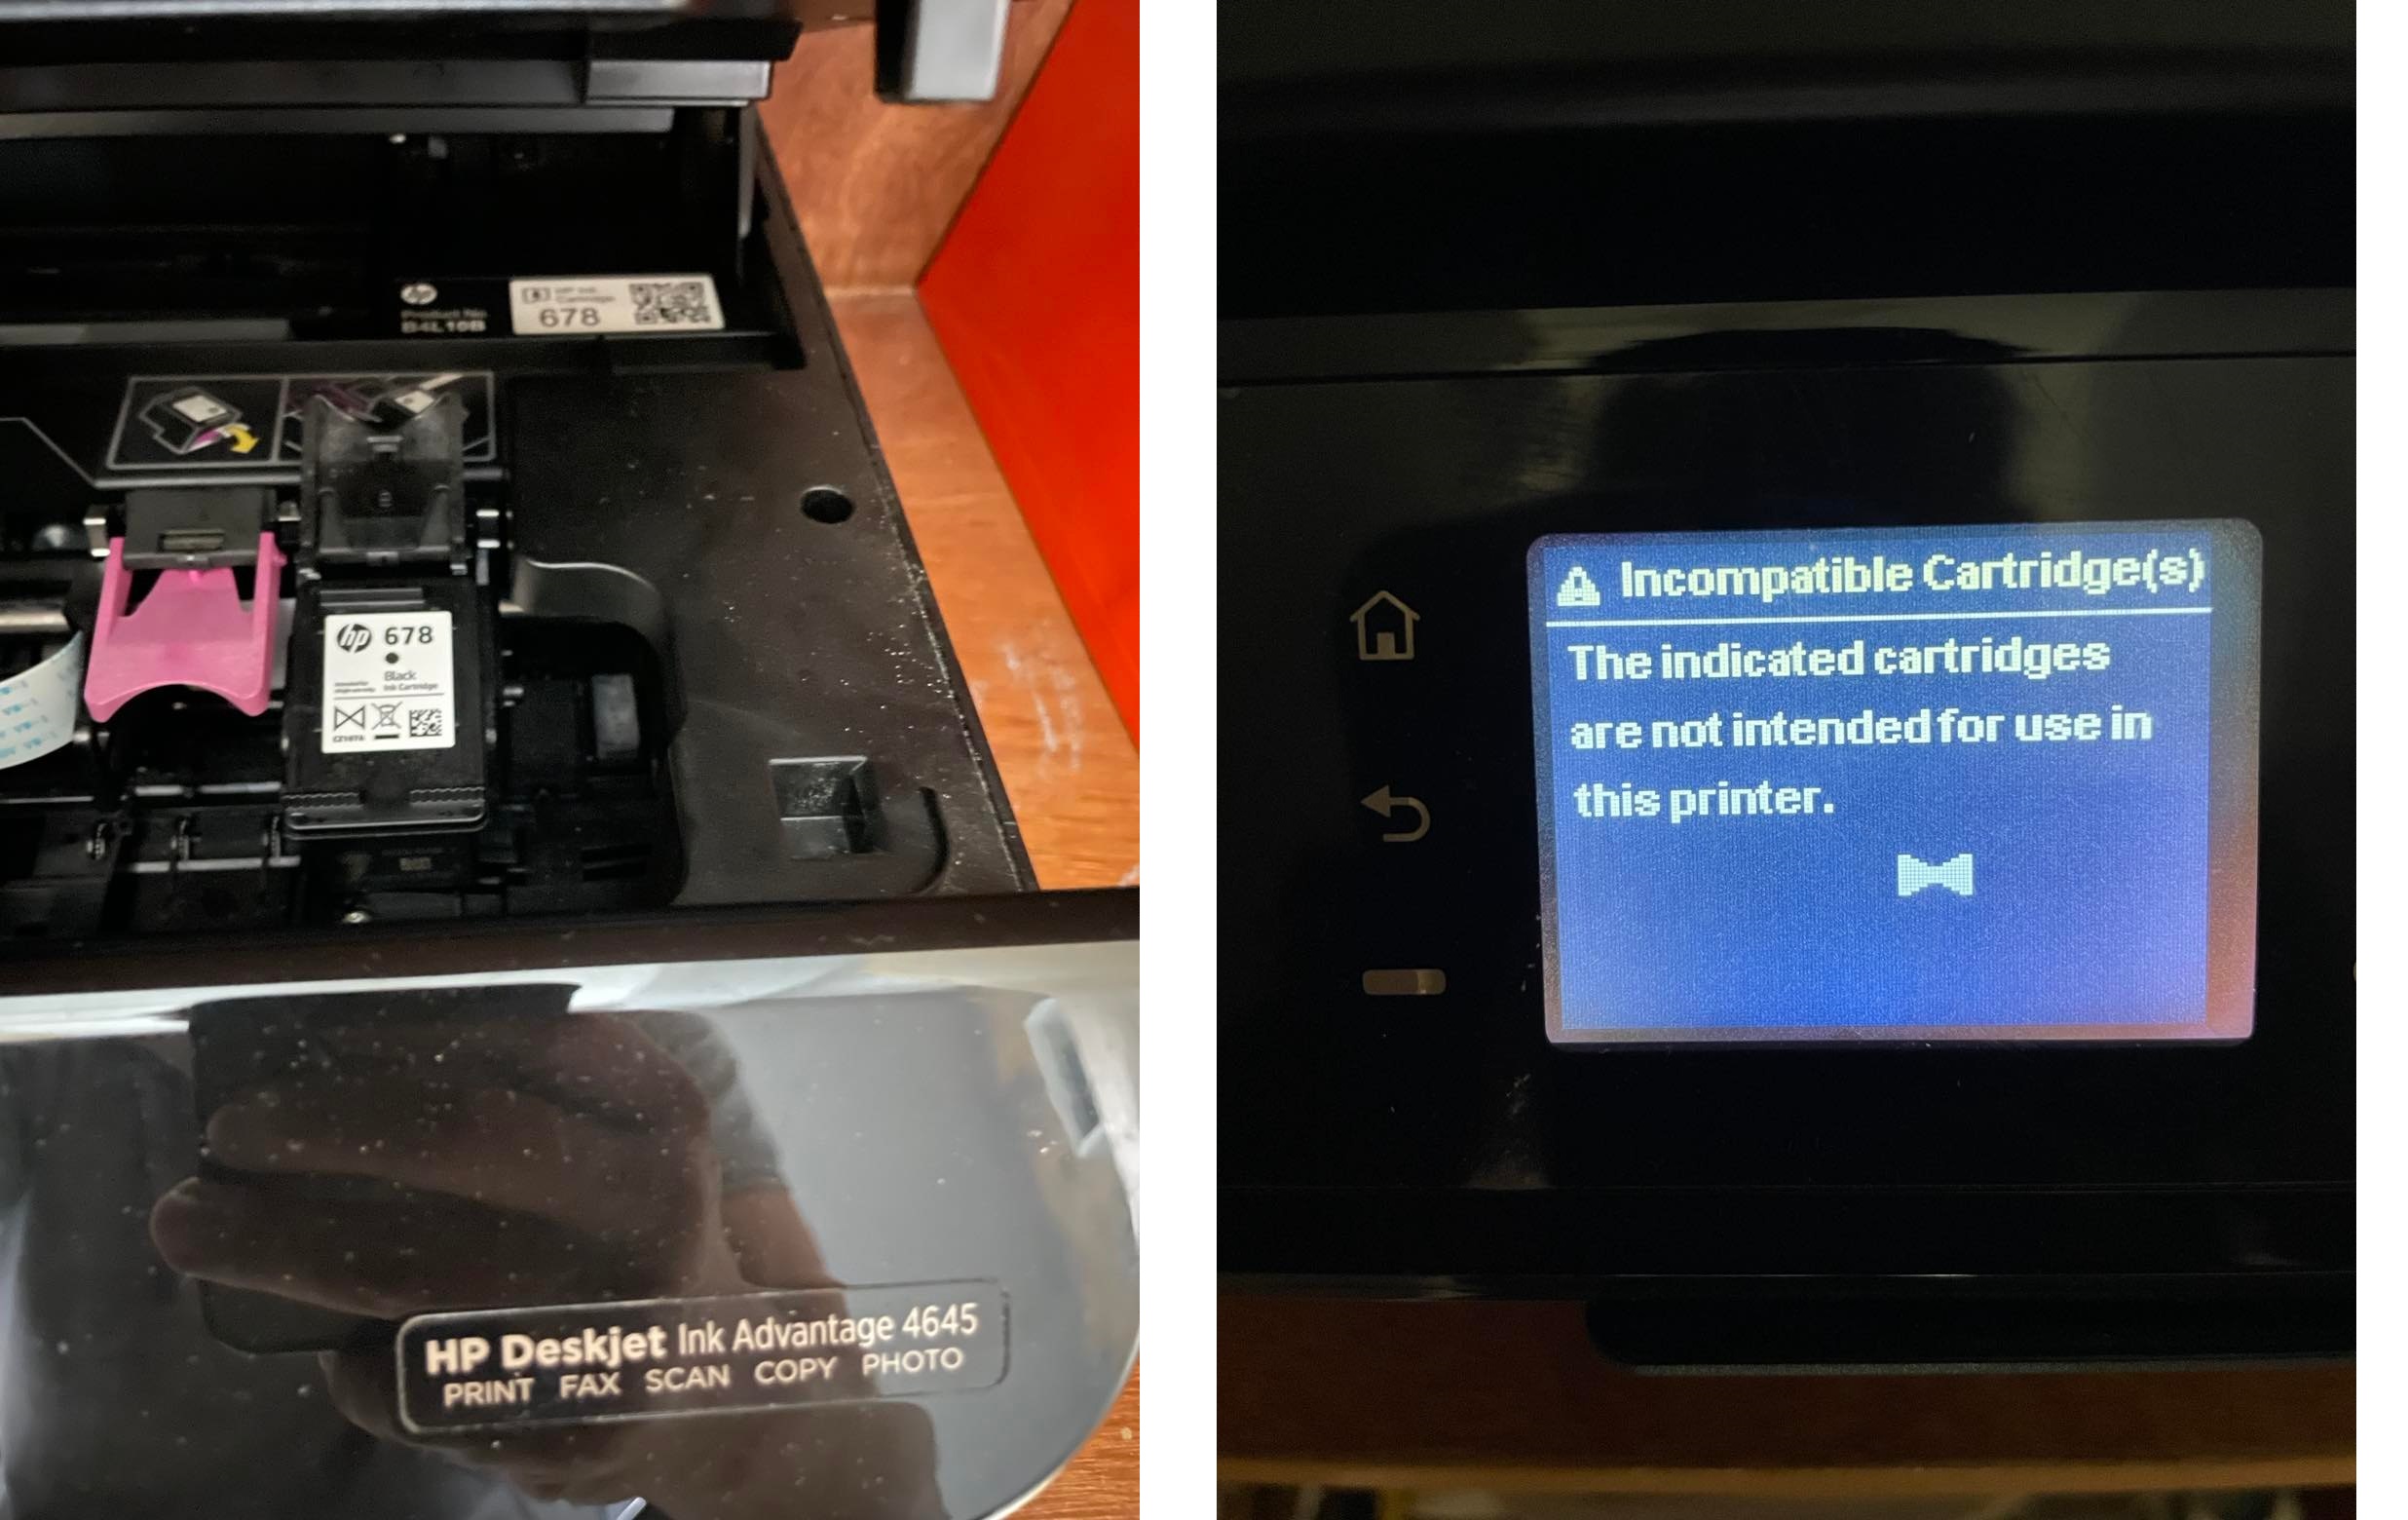 hp desk jet printer 4645 the indicated cartridges are not in... - HP  Support Community - 8412011